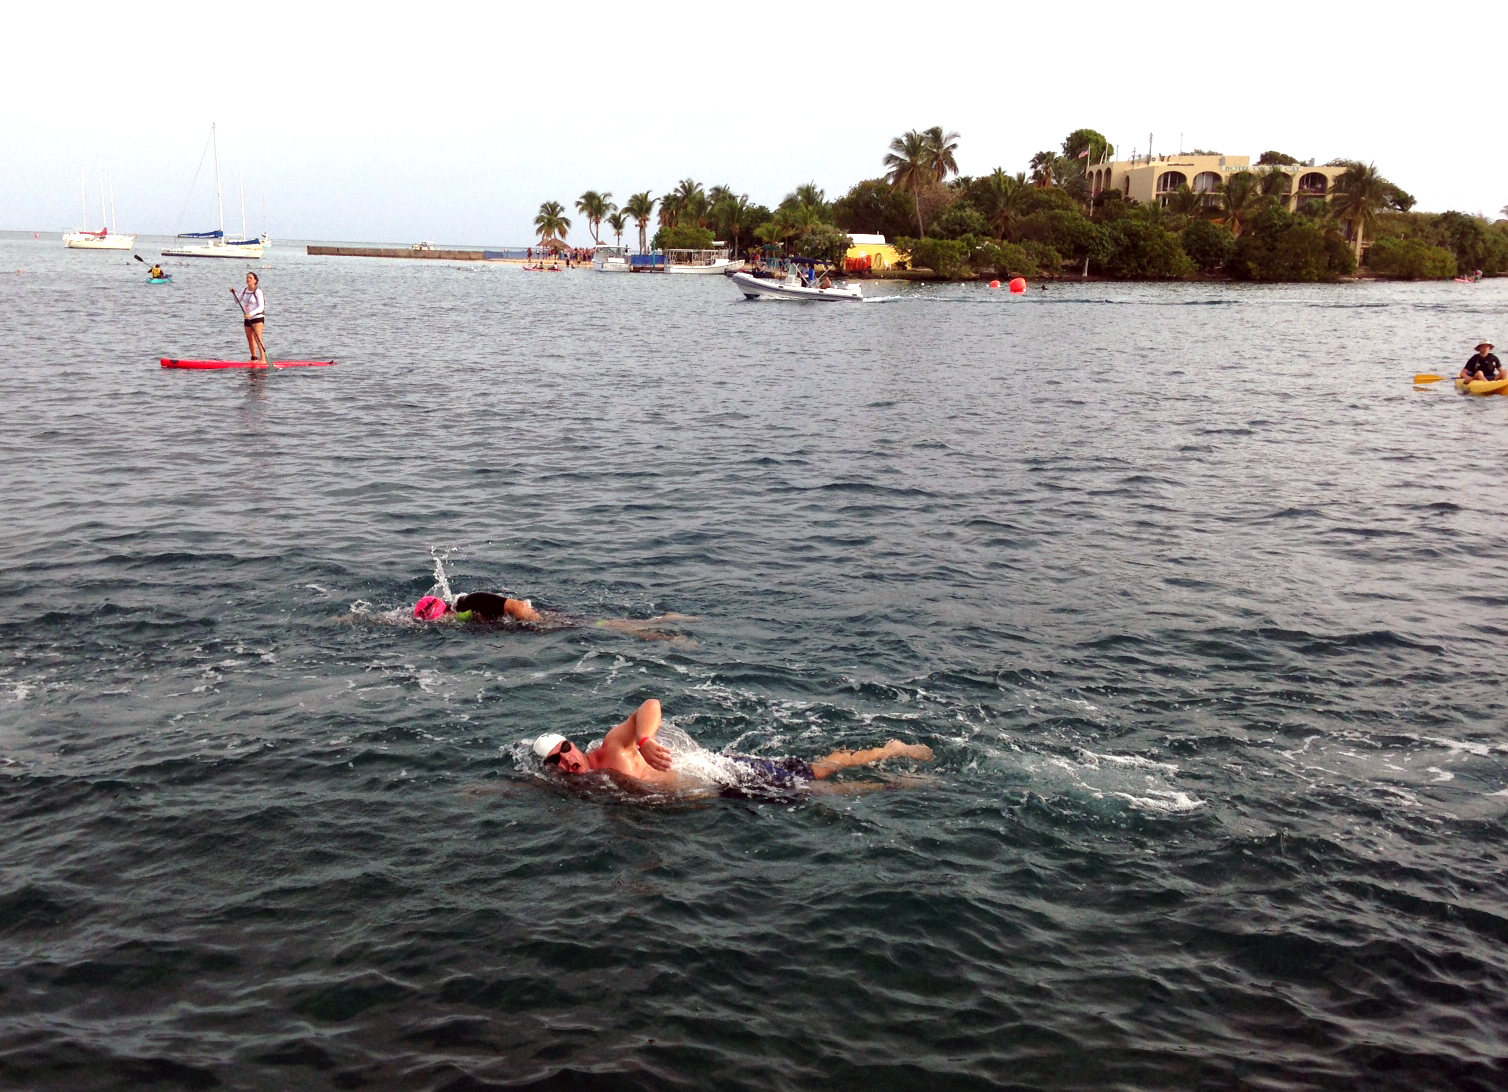 Jeff Dykstra finished eighth in his division for the swim portion of the Ironman 70.3 St. Croix on Sunday.